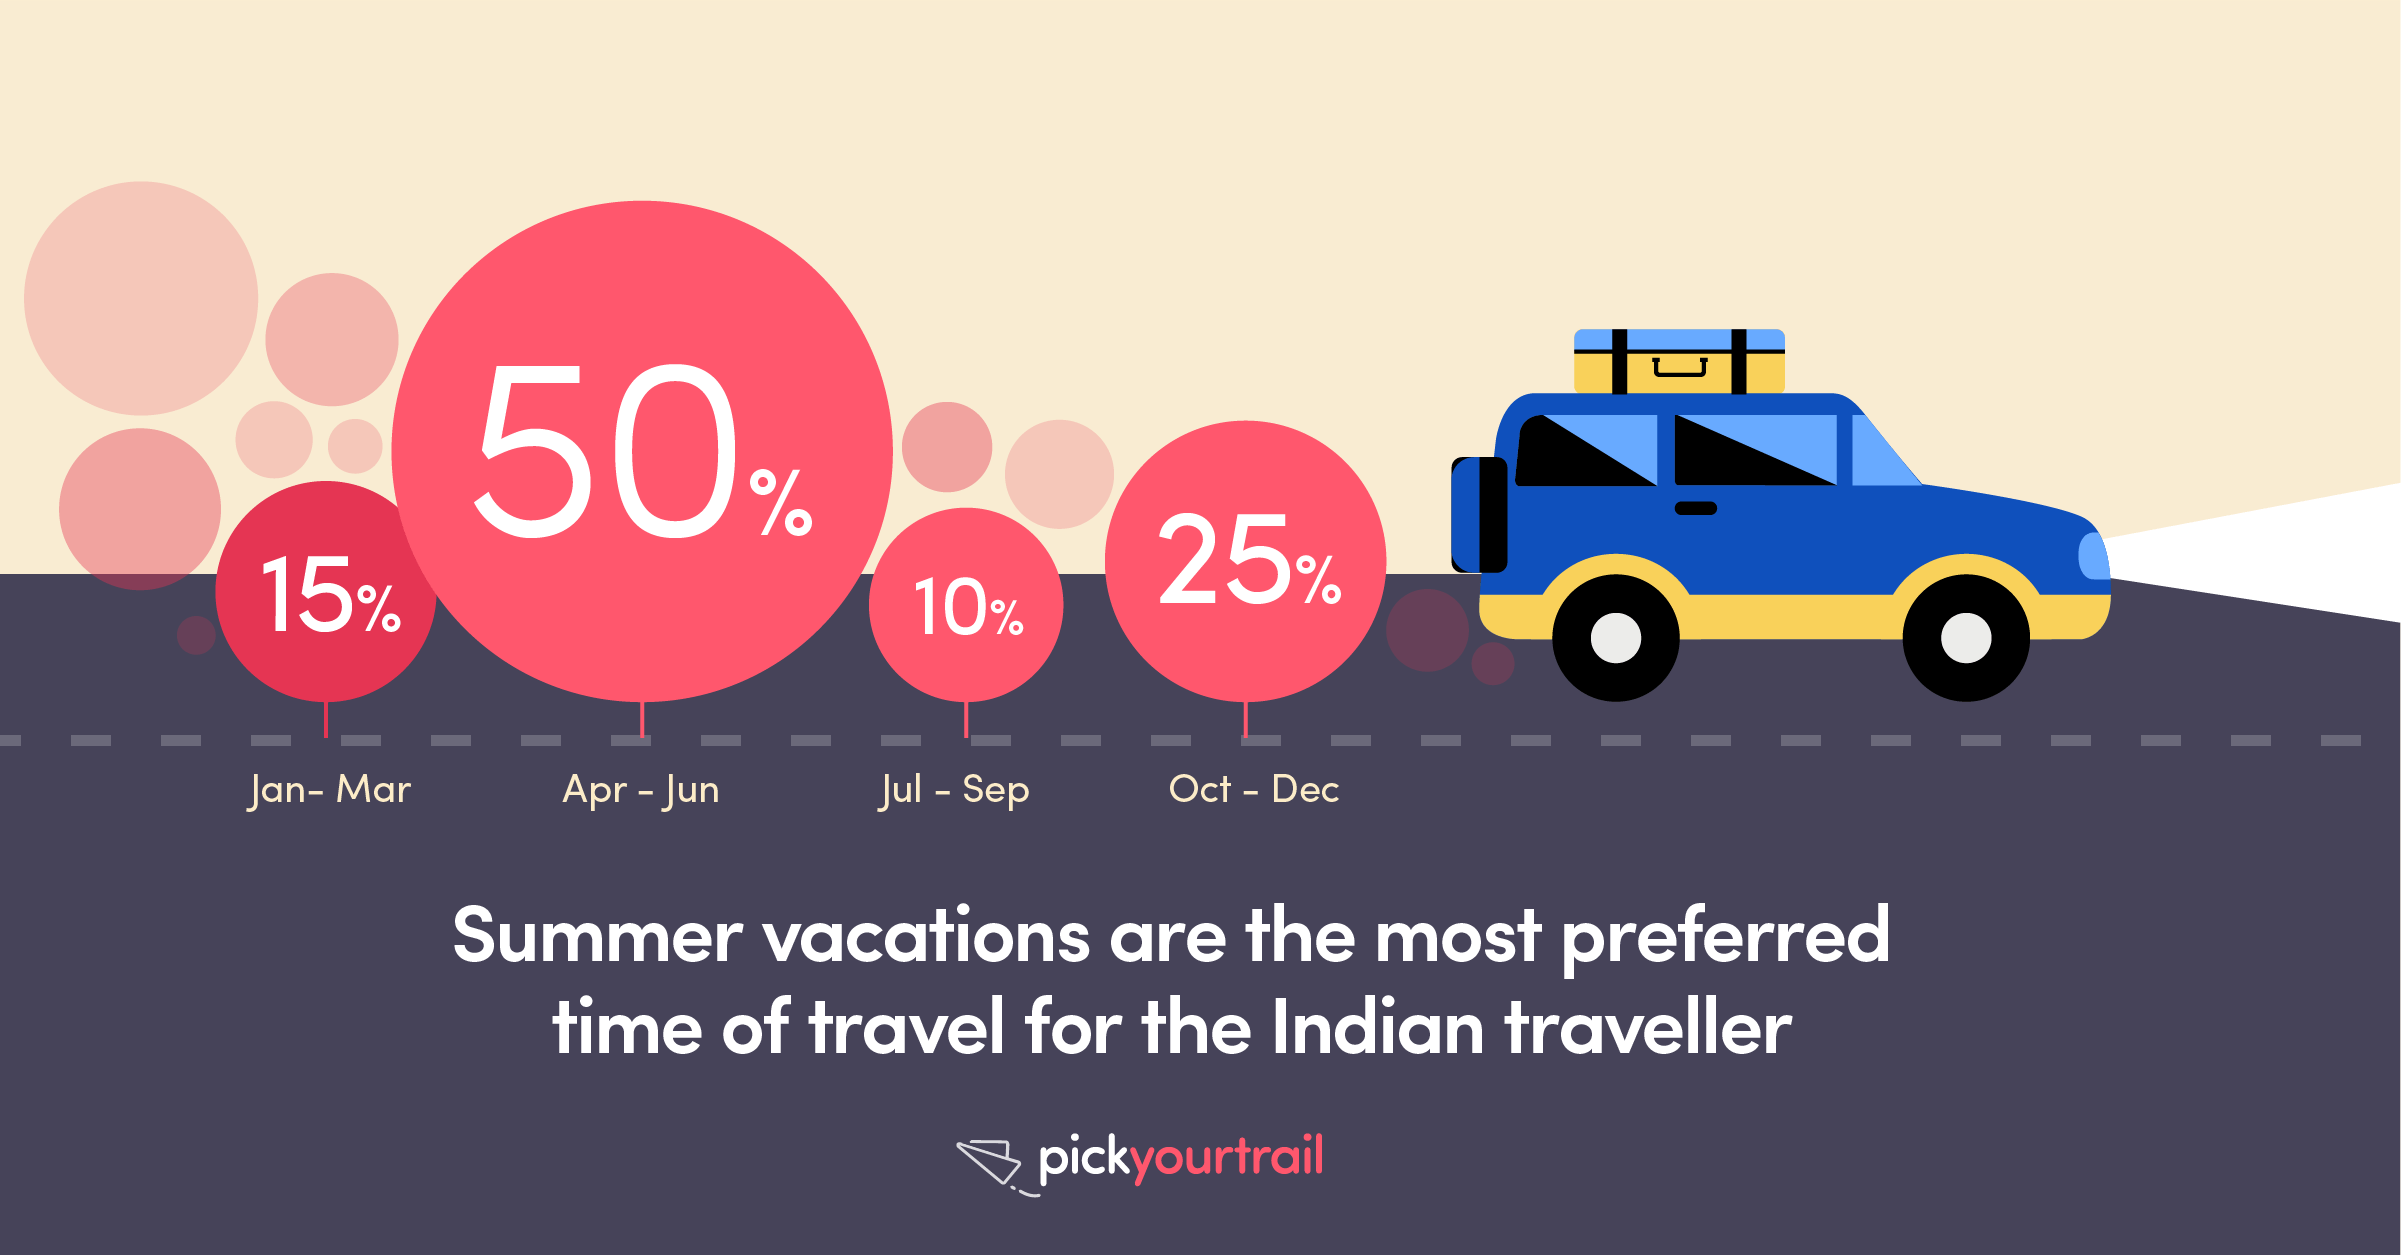 We love summers! Nearly 50% of Indian travellers prefer to go on their international vacation between April and June.